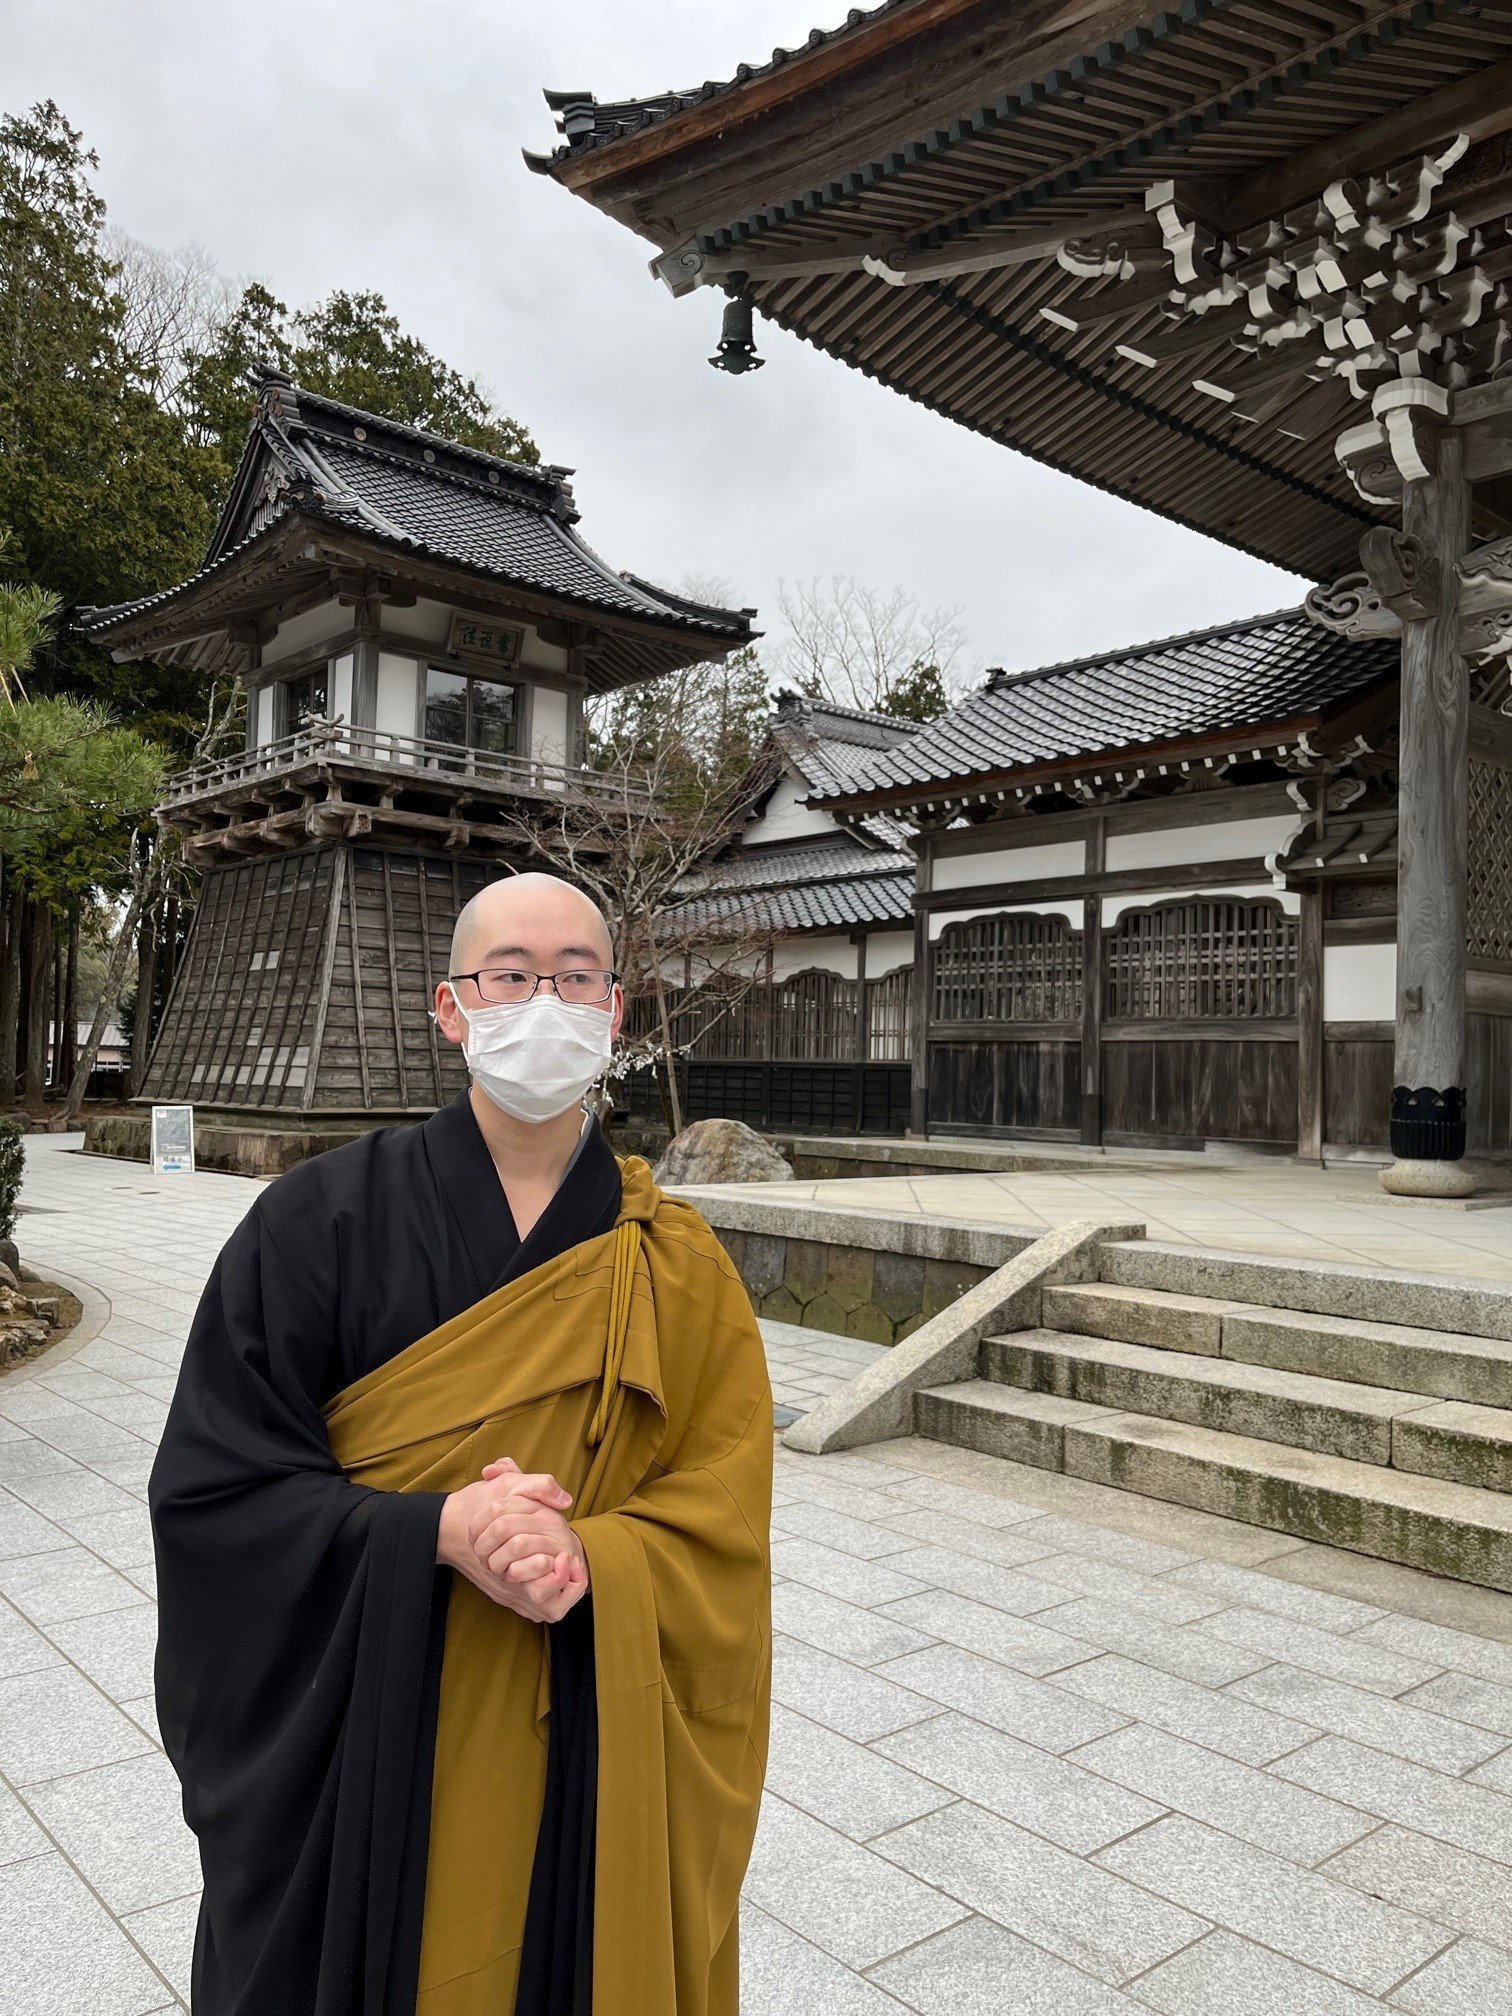 Monk at Temple.jpg